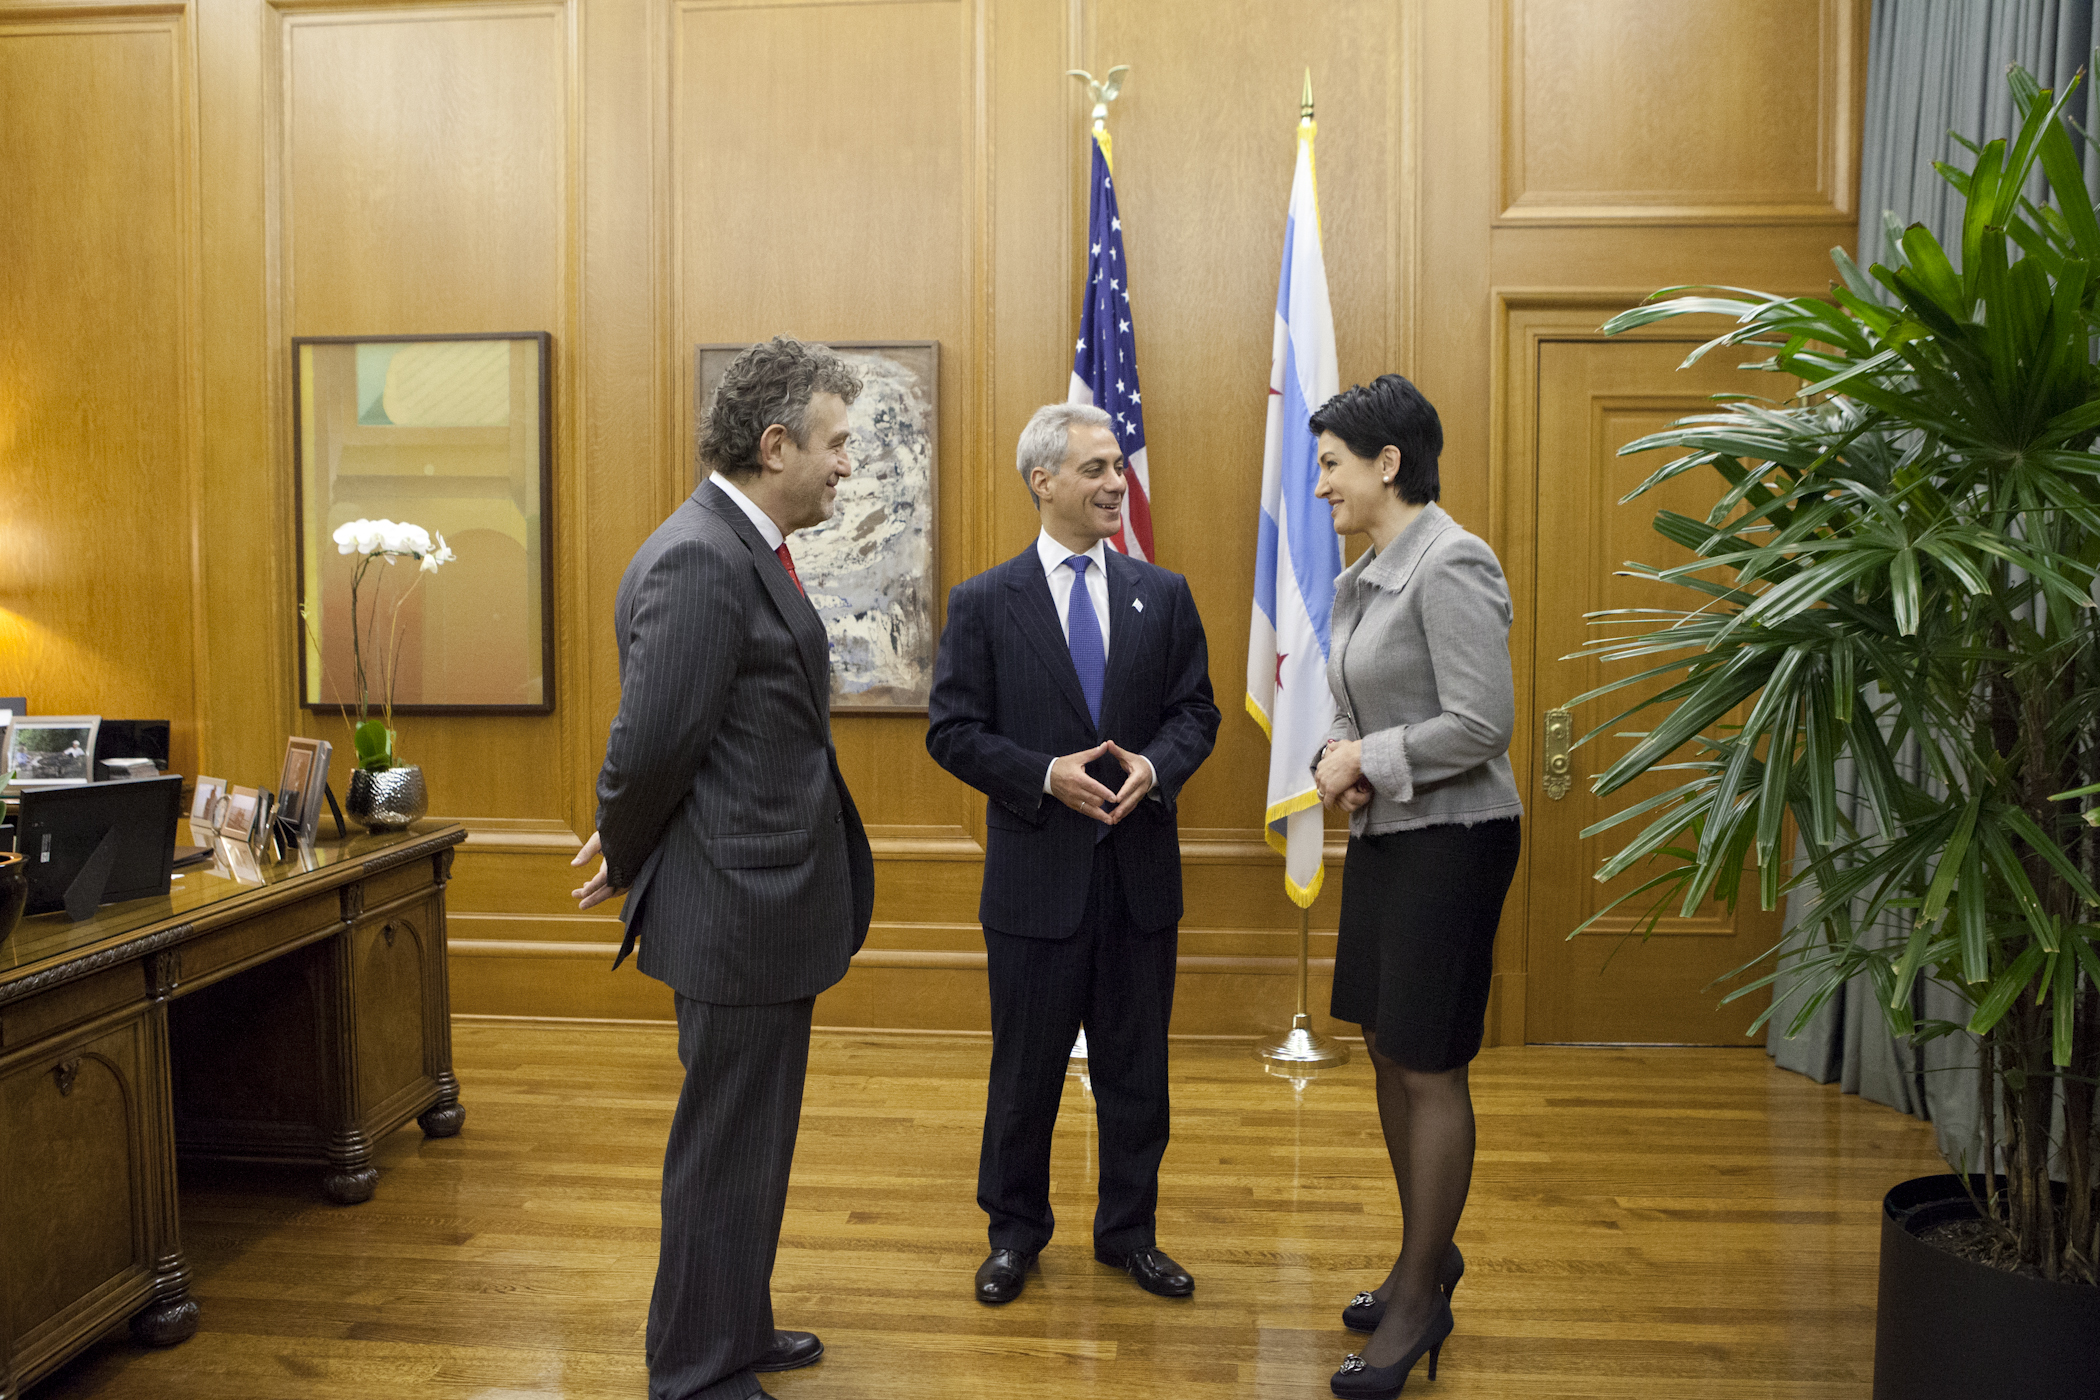 City of Chicago :: Mayor Emanuel Meets With Delegation Leaders Ambassador  Ryszard Schnepf and Under Secretary of State Beata Stelmach of Poland